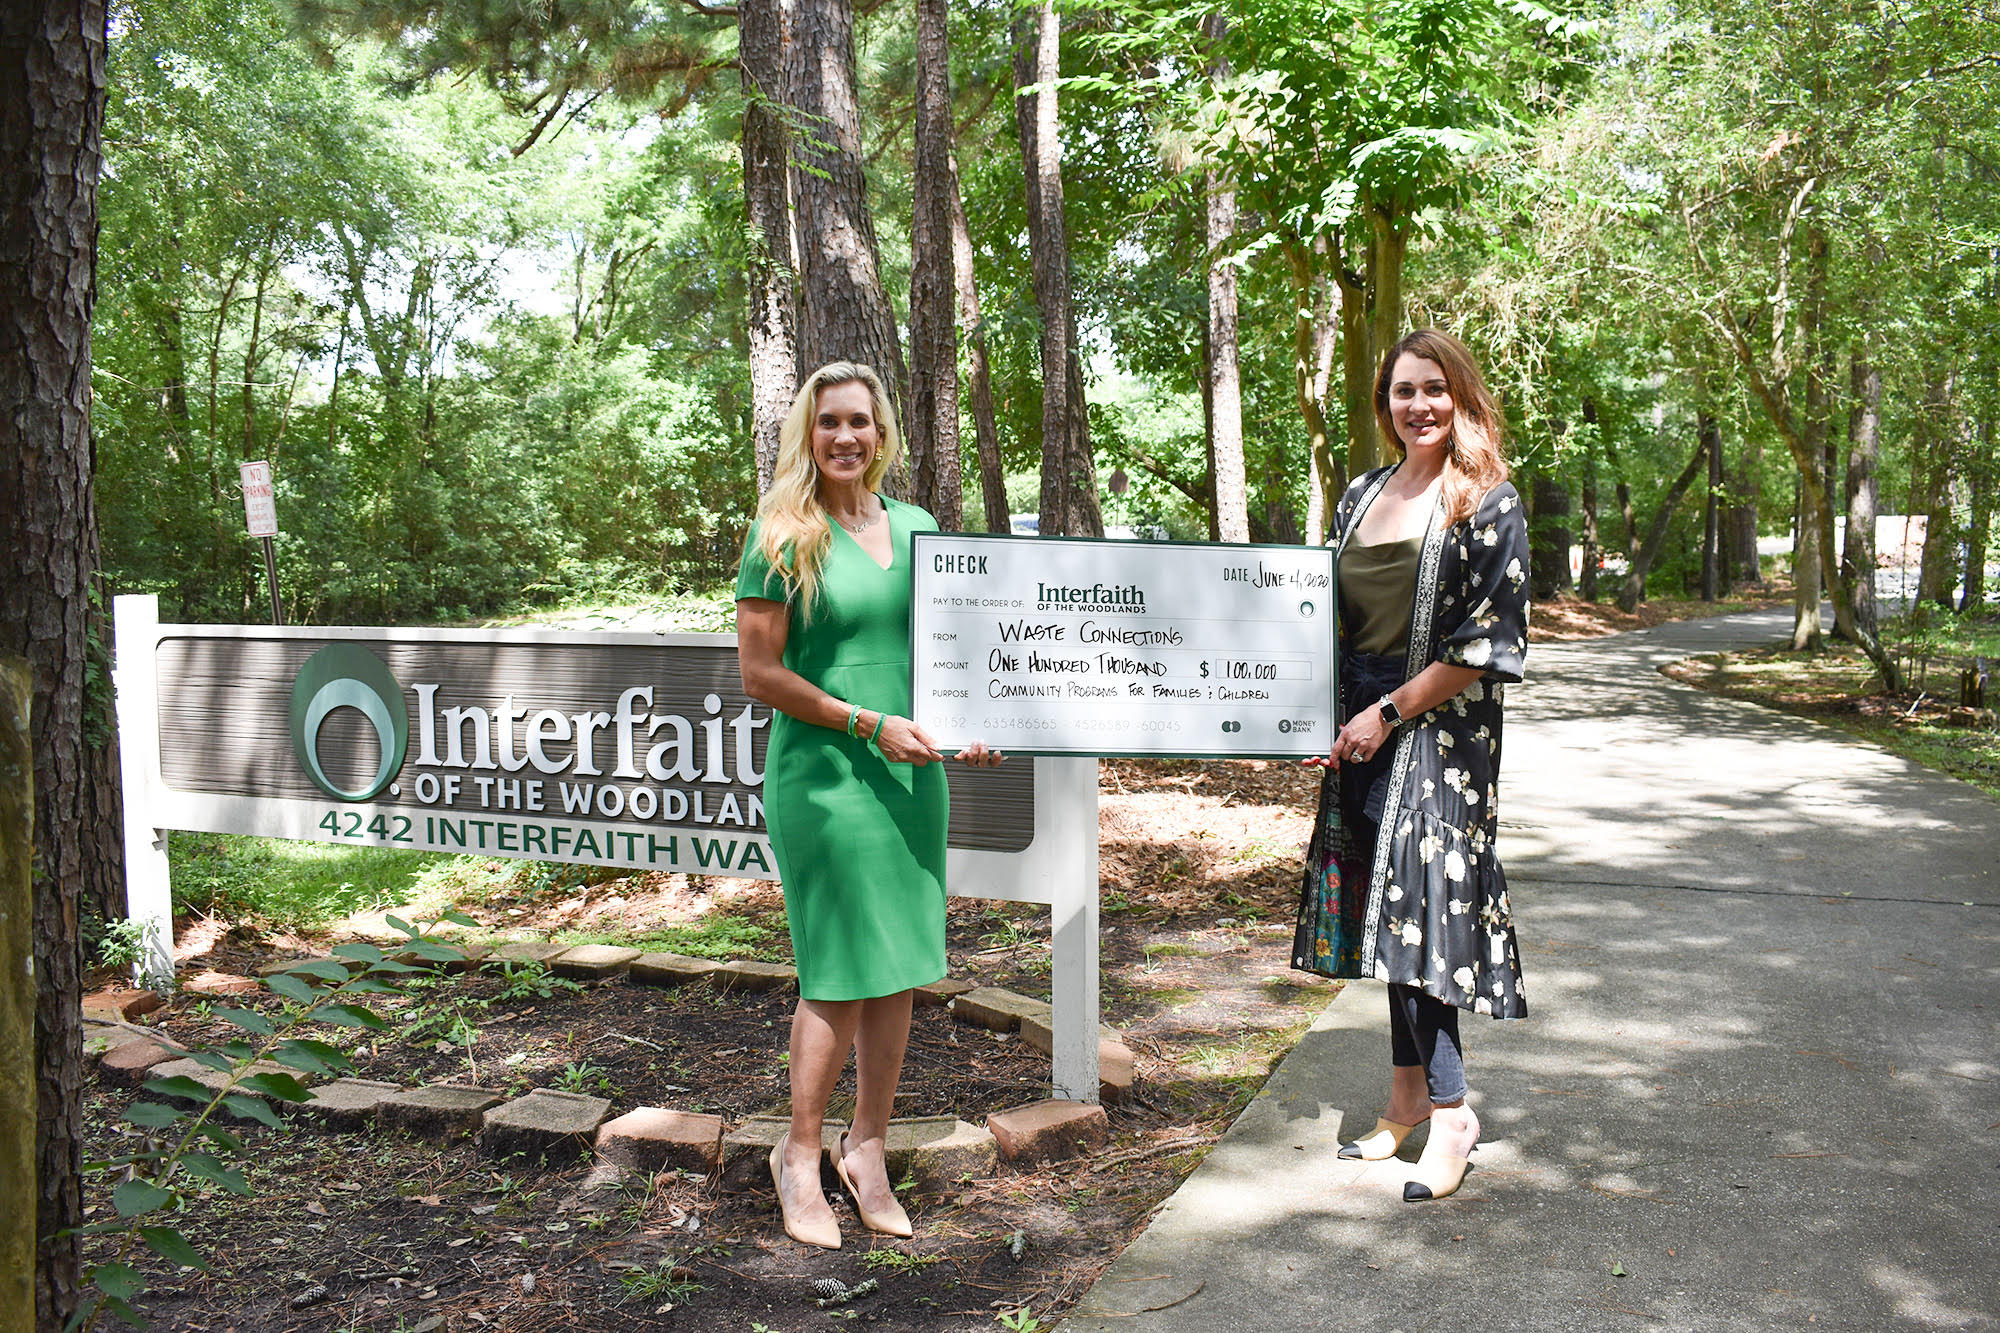 Golf Classic for Kids & Poker Experience, Waste Connections, Inc. donated $100,000 to Interfaith of the Woodlands. 